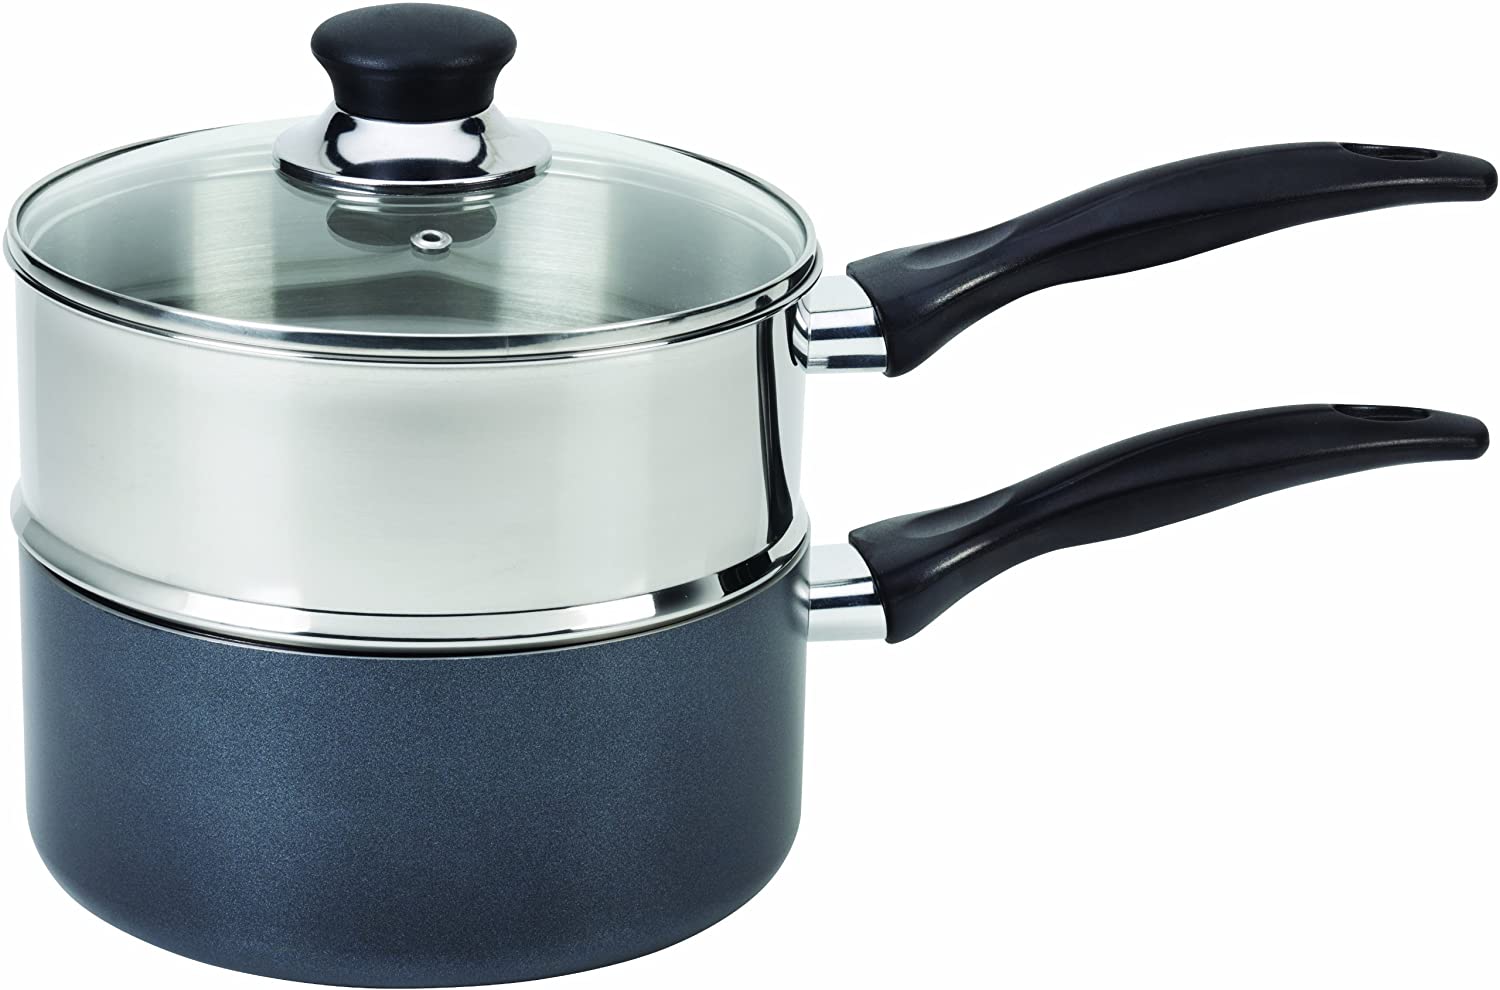 T-fal B1399663 Specialty Stainless Steel Phenolic Handle Double Boiler, 3-Quart